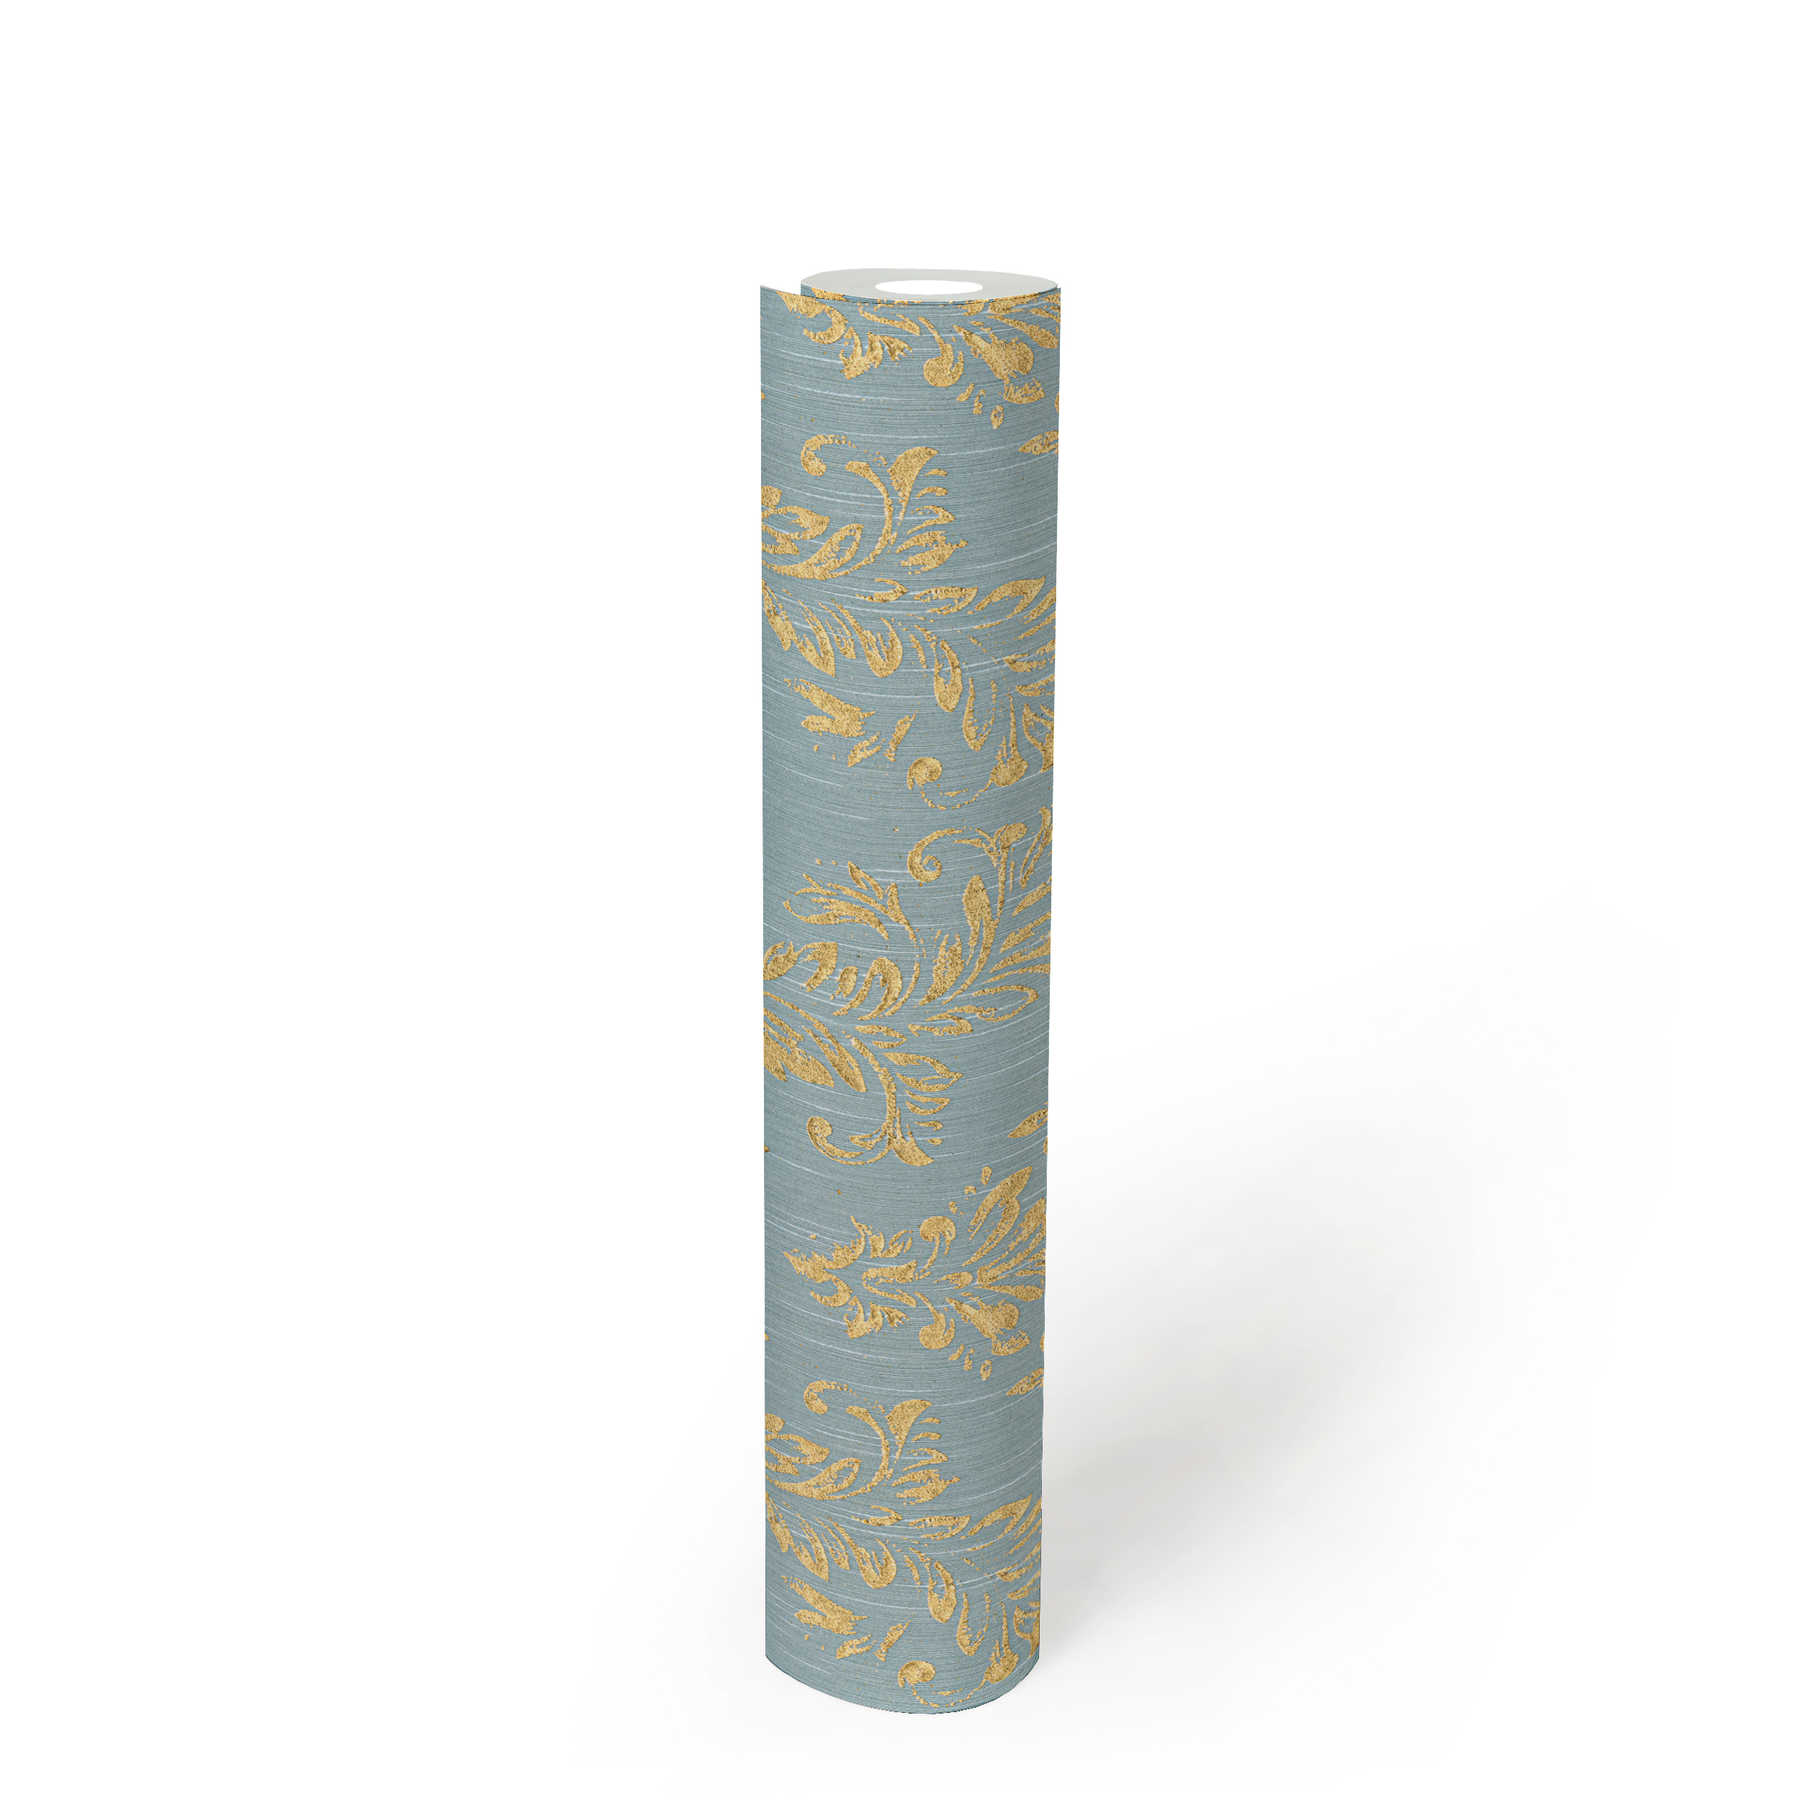             Ornament wallpaper floral with gold glitter effect - gold, blue, green
        